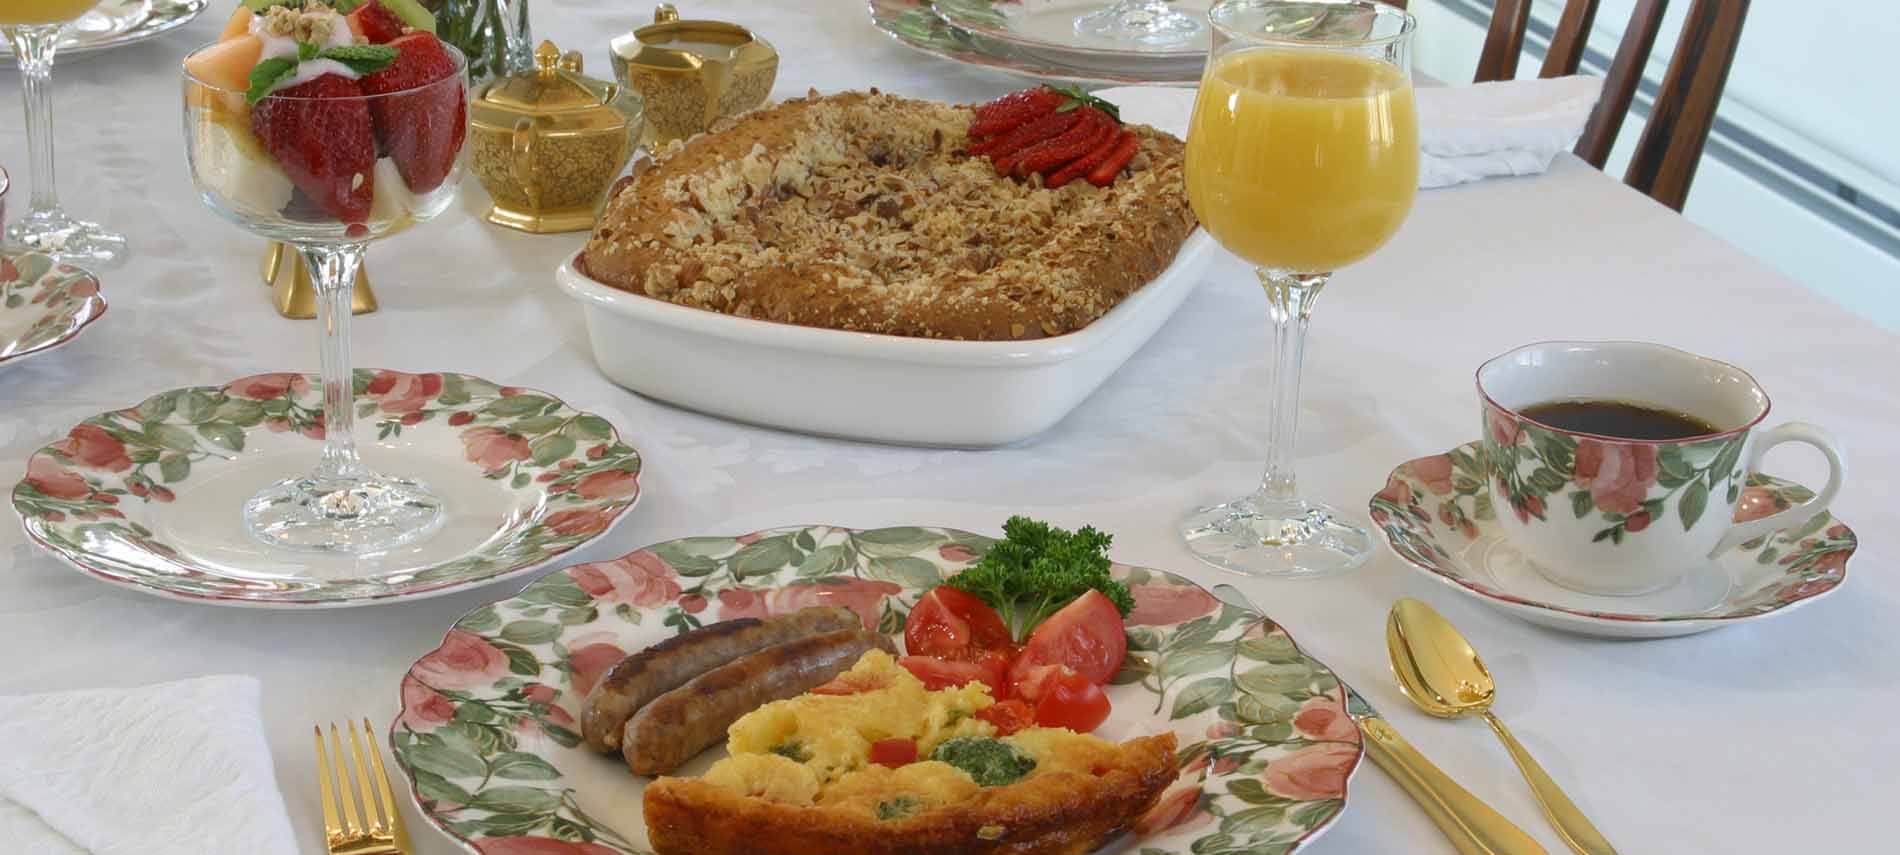 Quiche slice with sausages, tomato, parsley on plate with rose, green foliage pattern; cup of coffee; colorful fruits in goblet.